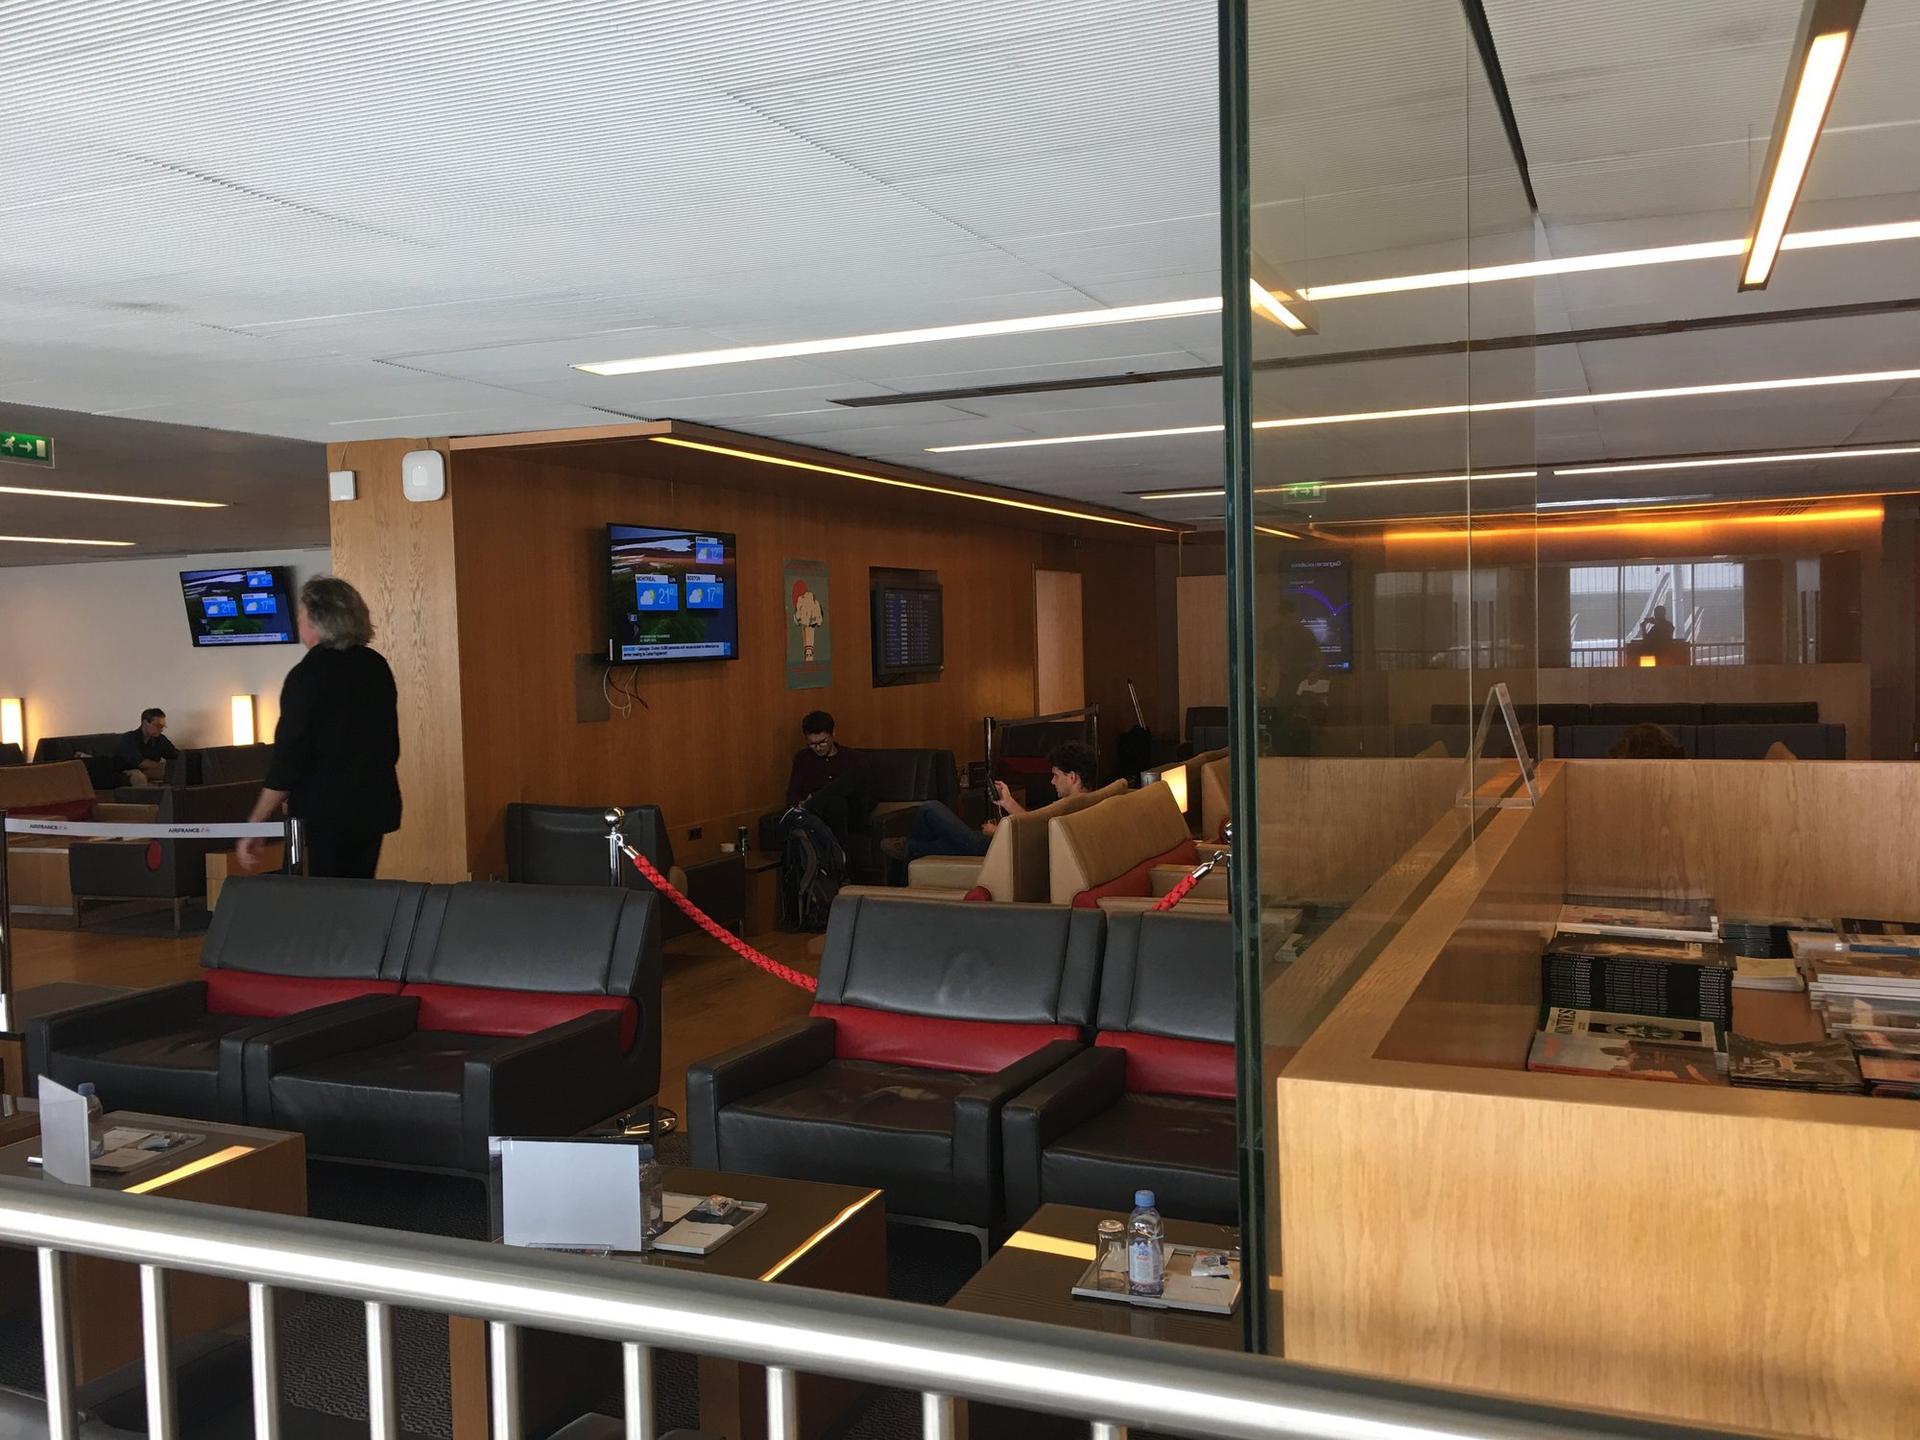 Air France Lounge (Concourse K) image 11 of 35